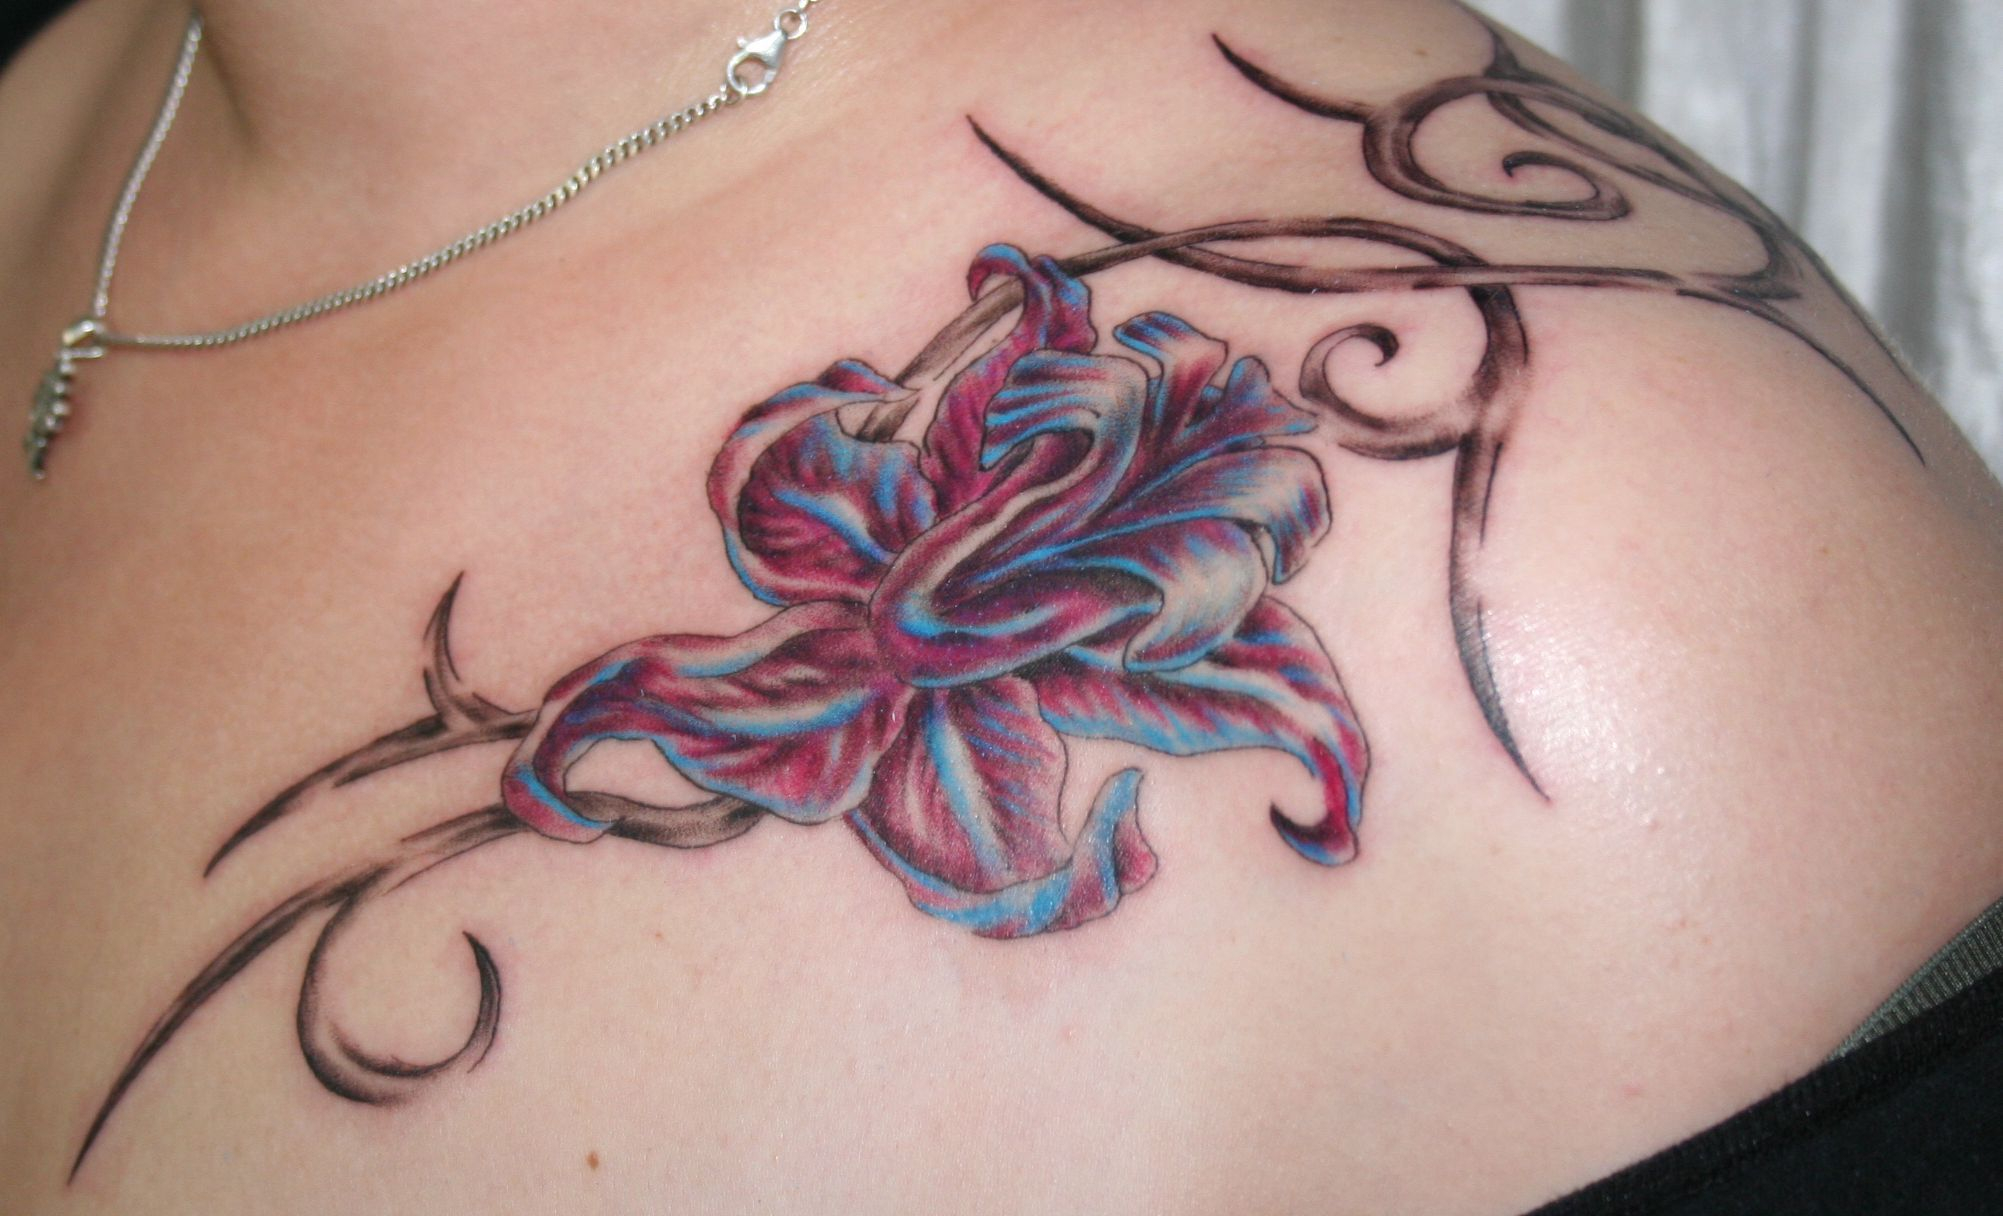 Tattoos For Women Over 50 Images Of Tattoo Designs Favorite For in sizing 2003 X 1216